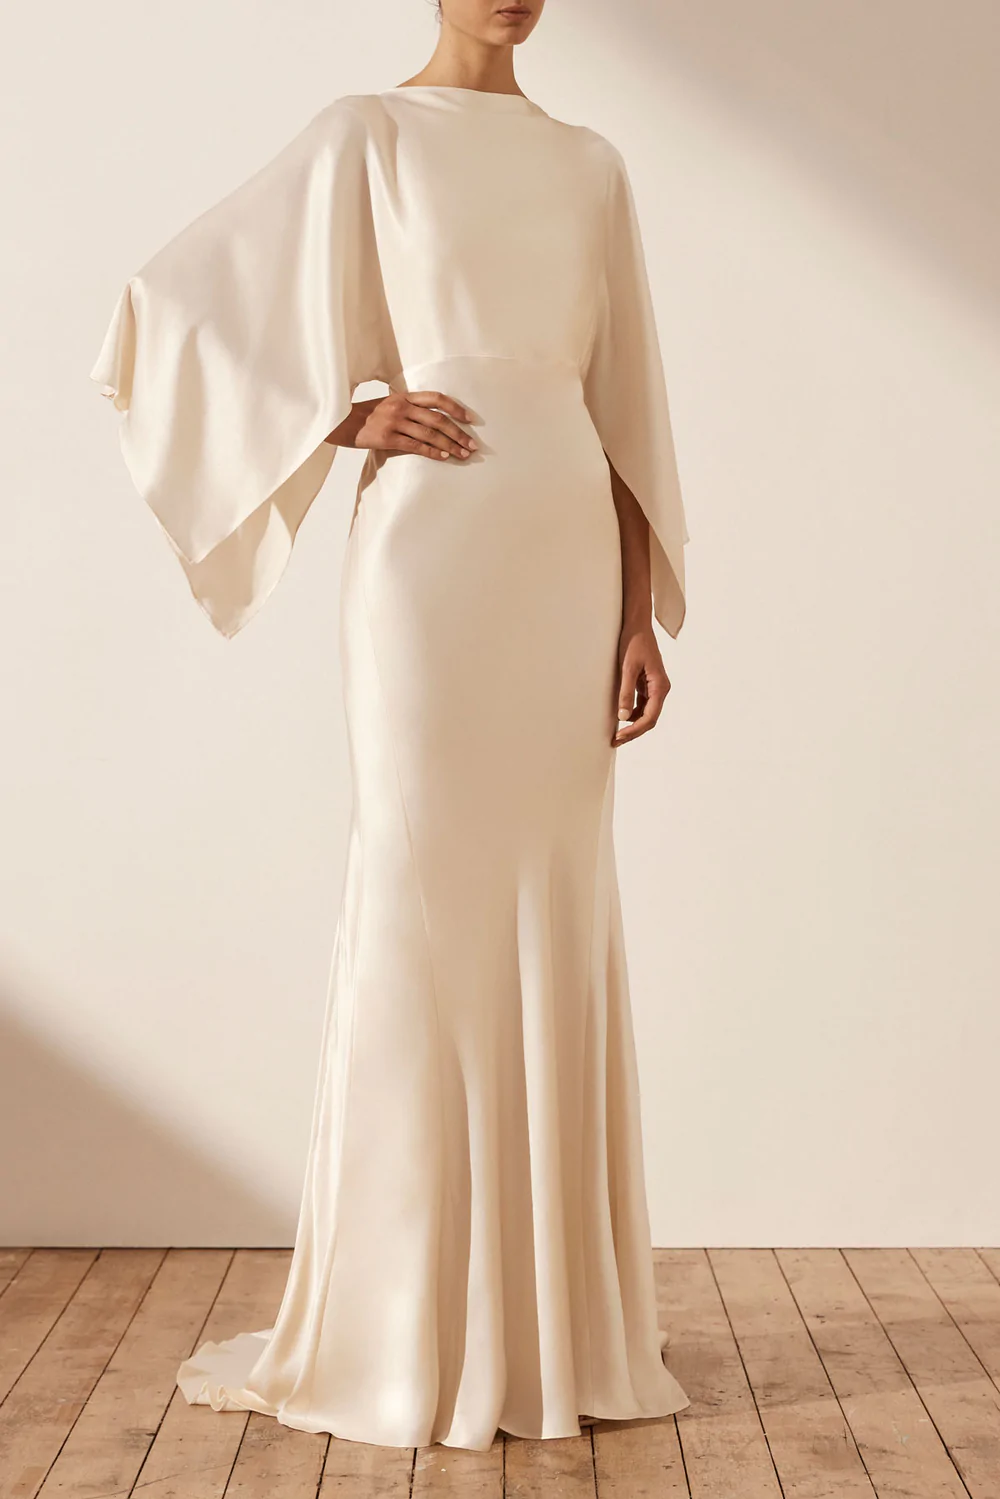 Formal
Maxi Dresses For Chic Women  In Night
Parties